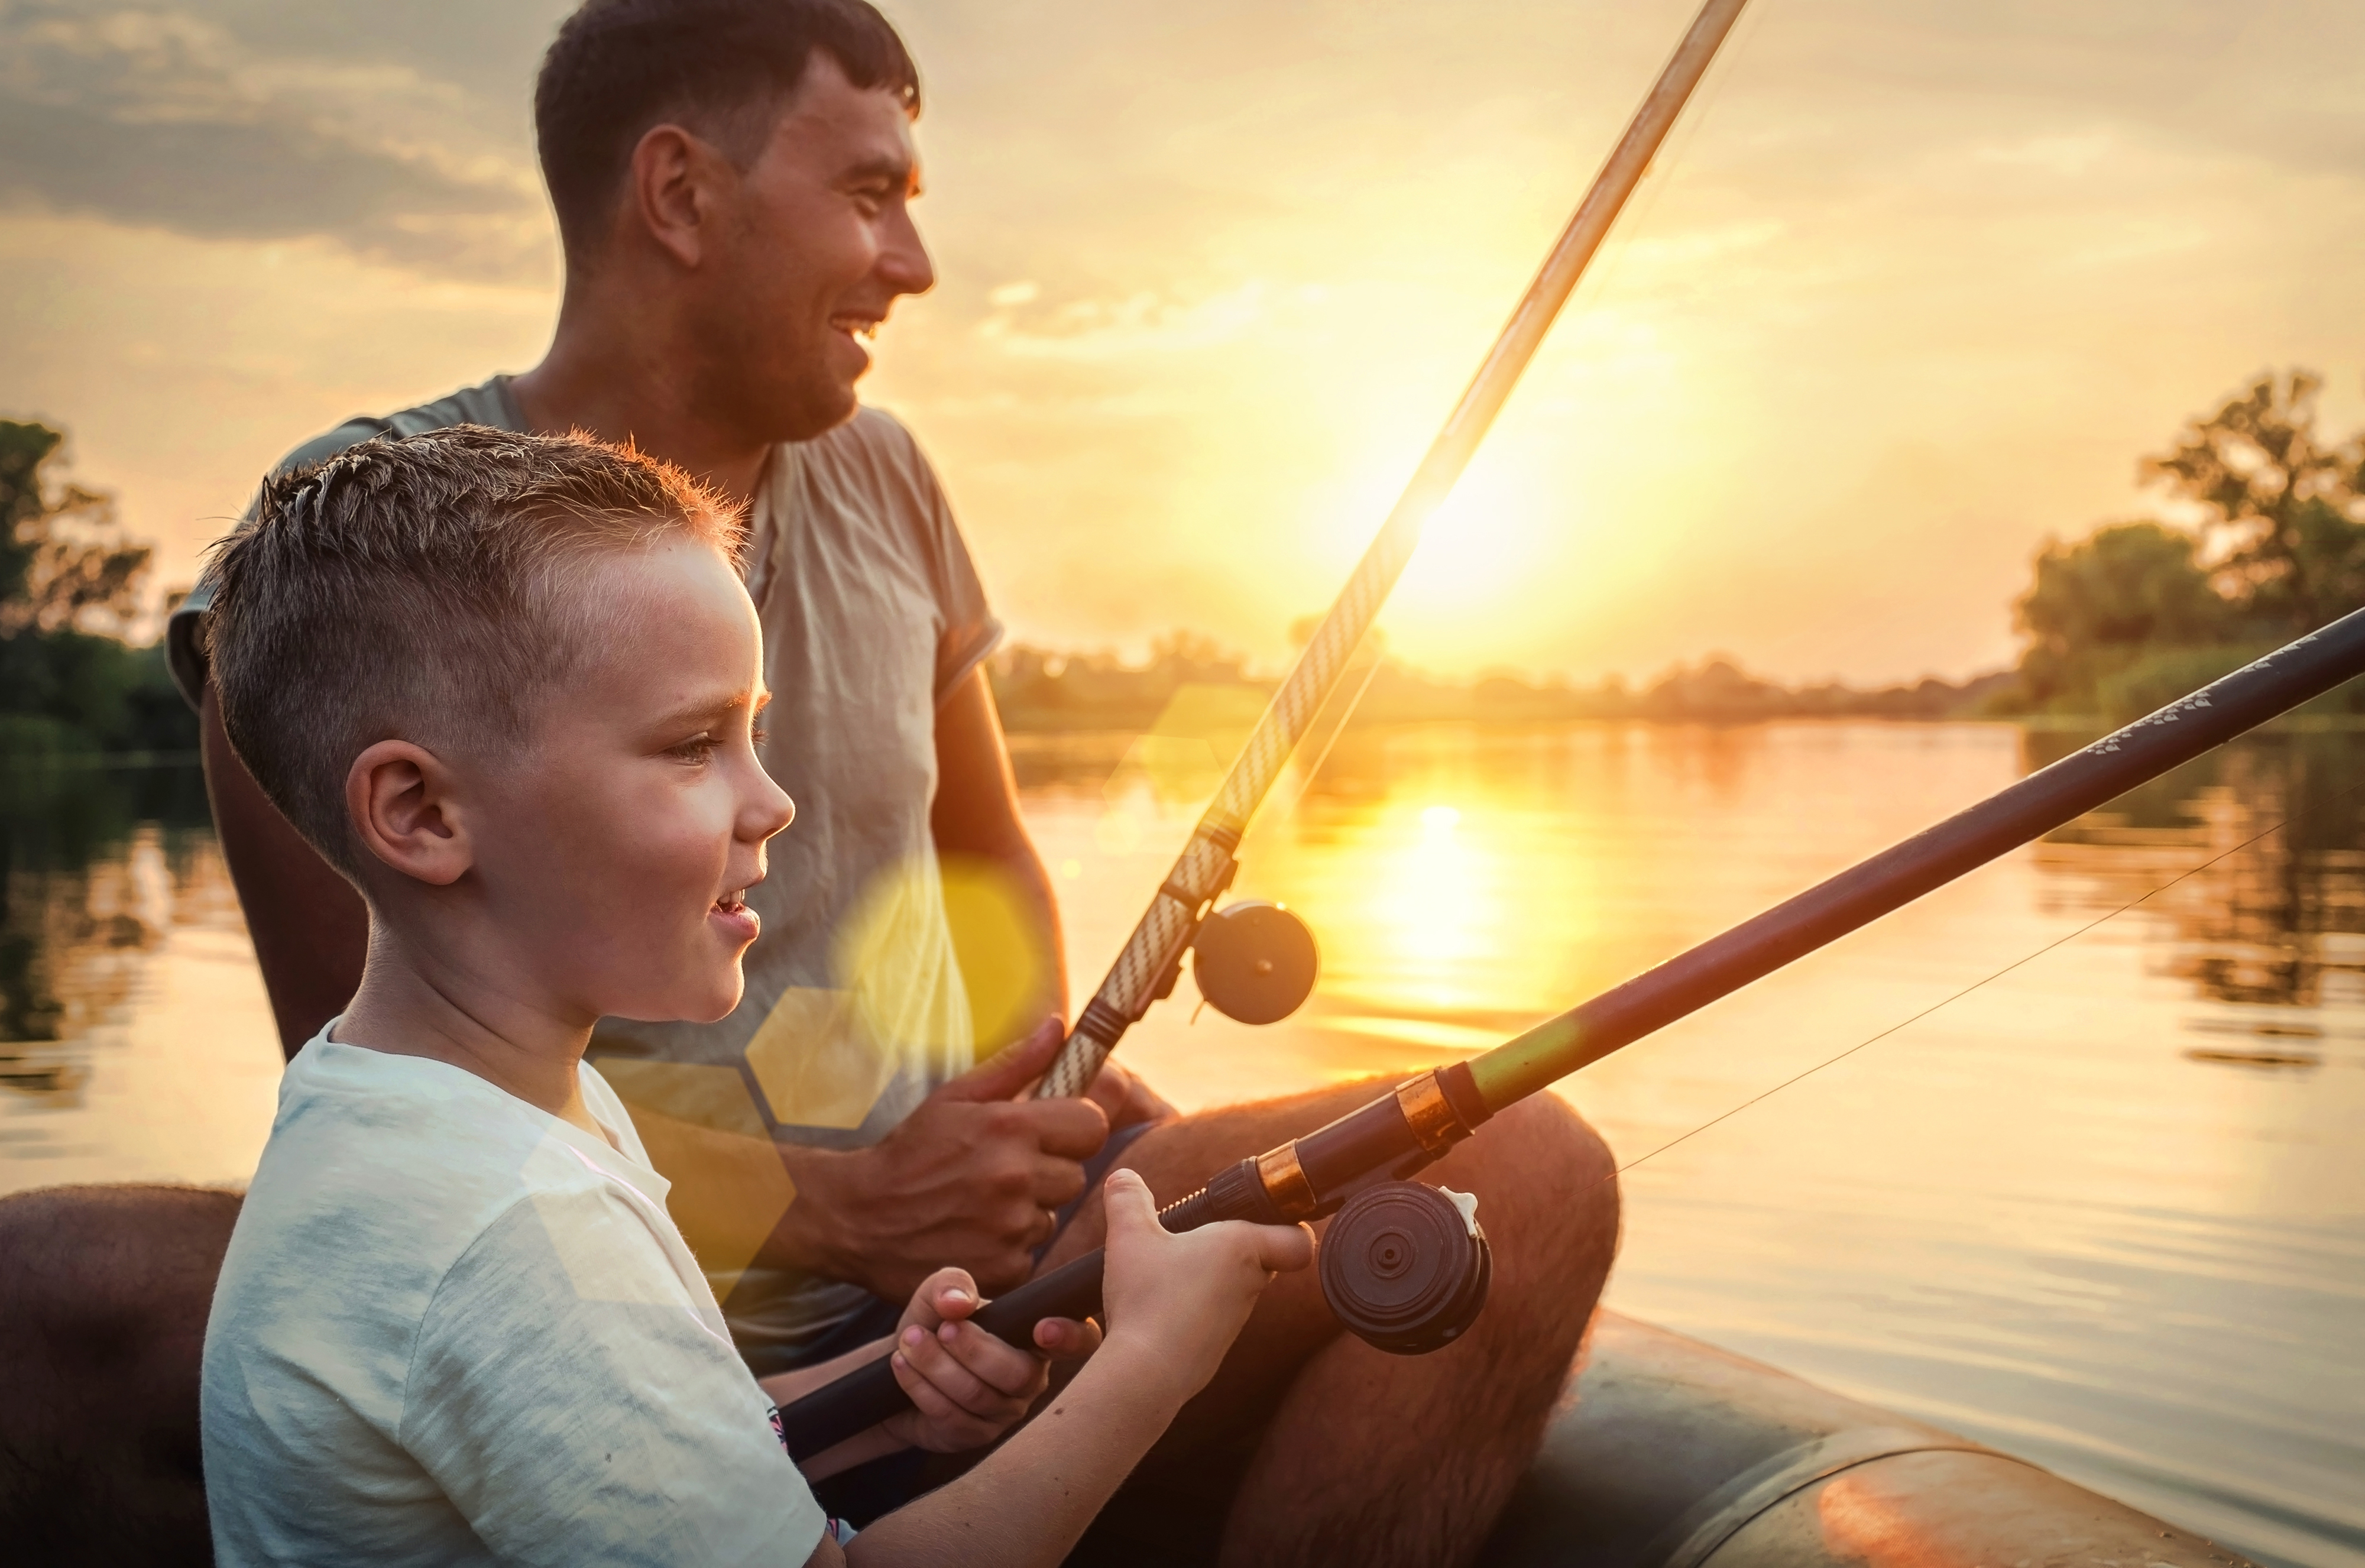 Father and son fishing together from a boat during sunset | Source: Shutterstock